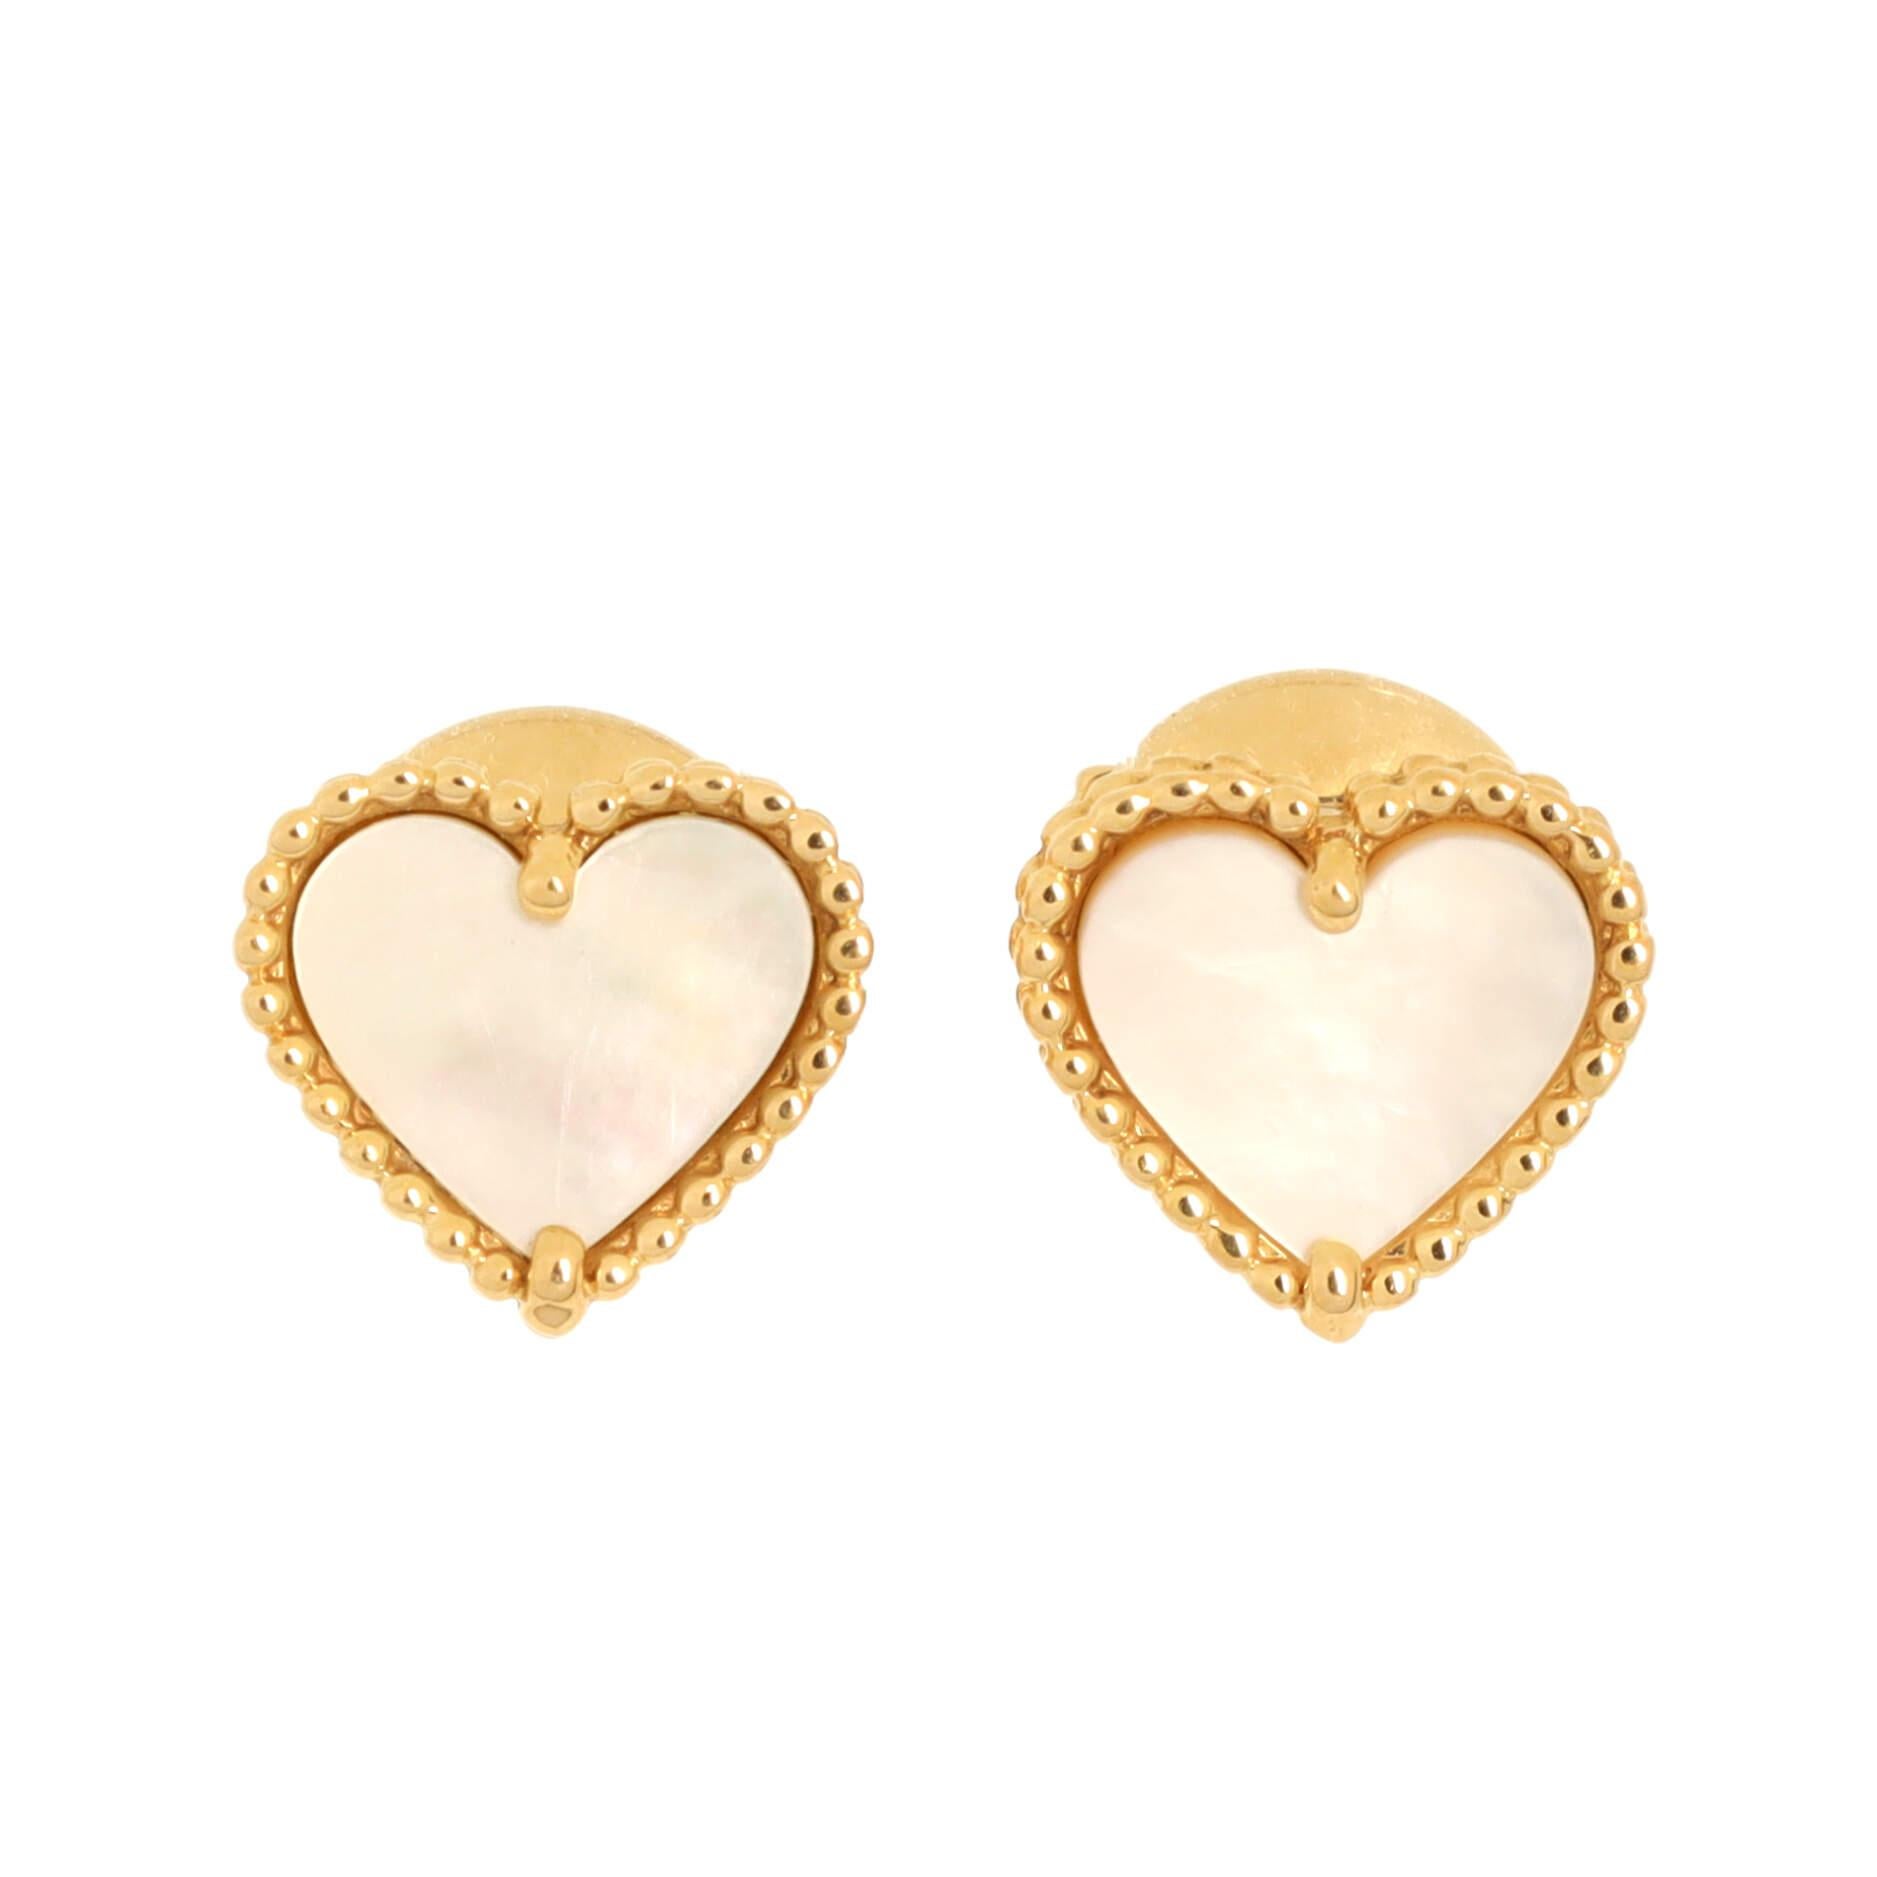 Condition: Very good. Moderate wear throughout.
Accessories: No Accessories
Measurements: Height/Length: 8.00 mm, Width: 8.75 mm
Designer: Van Cleef & Arpels
Model: Sweet Alhambra Heart Earrings 18K Yellow Gold with Mother of Pearl
Exterior Color: